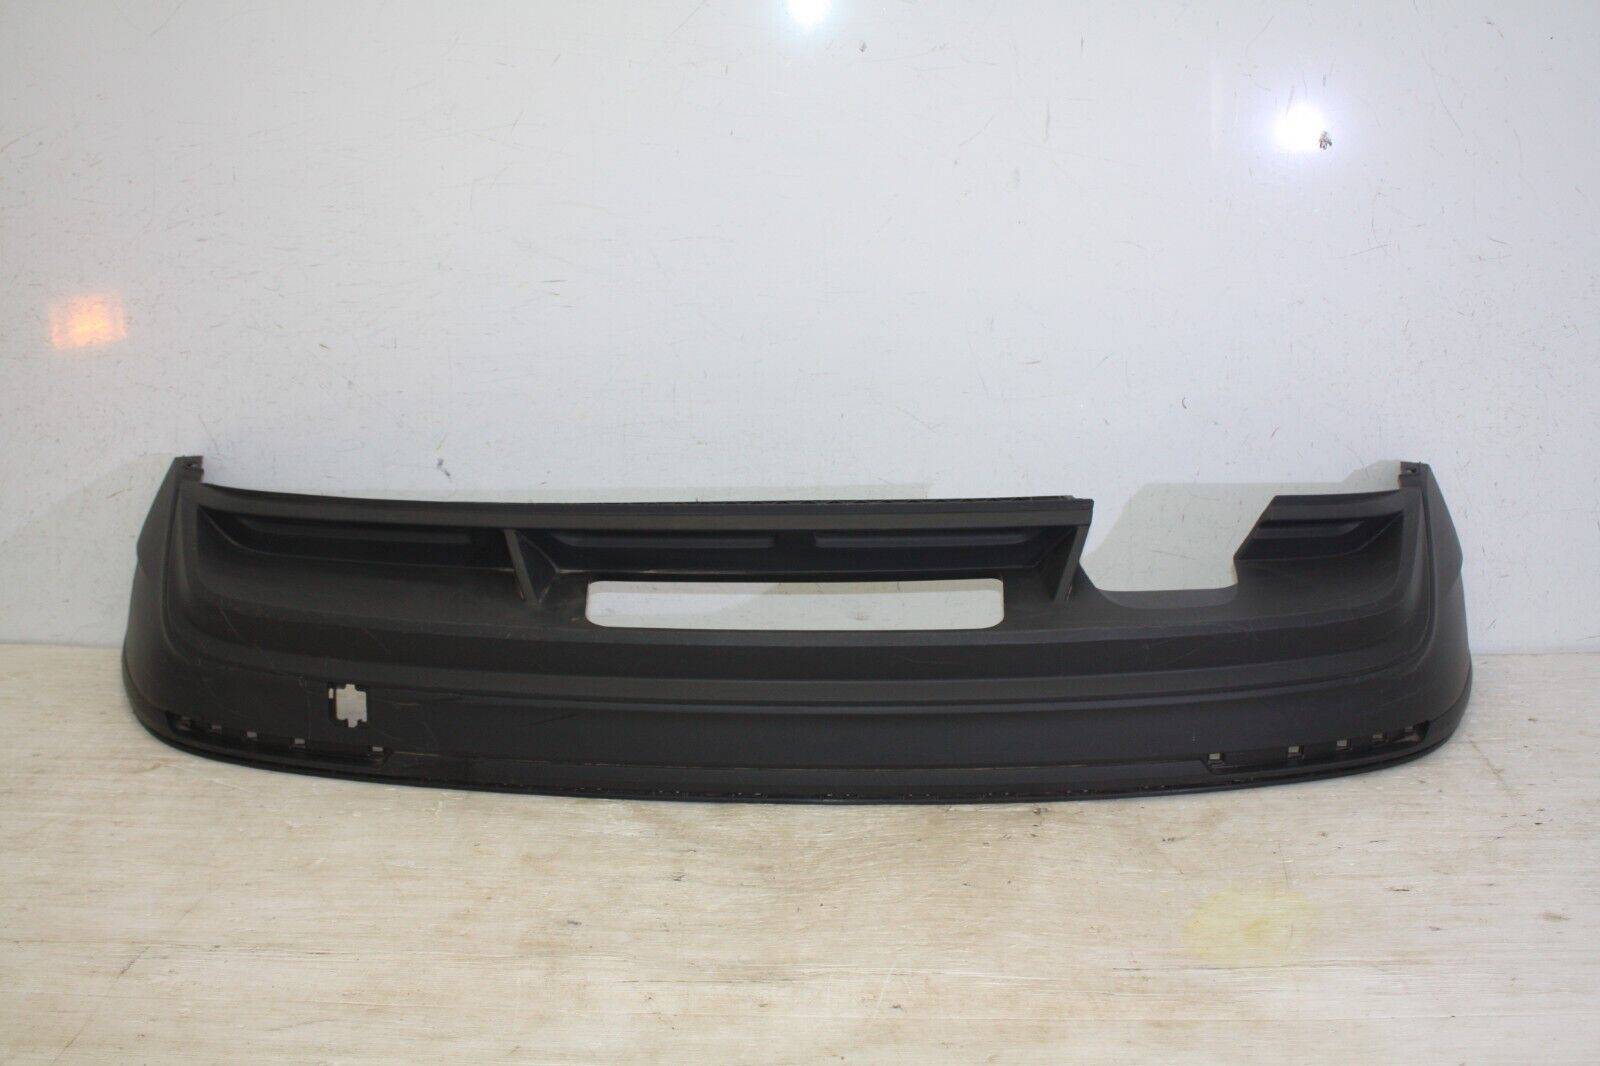 VW Tiguan Rear Bumper Lower Section 2016 TO 2020 5NA807521 Genuine 176149756046